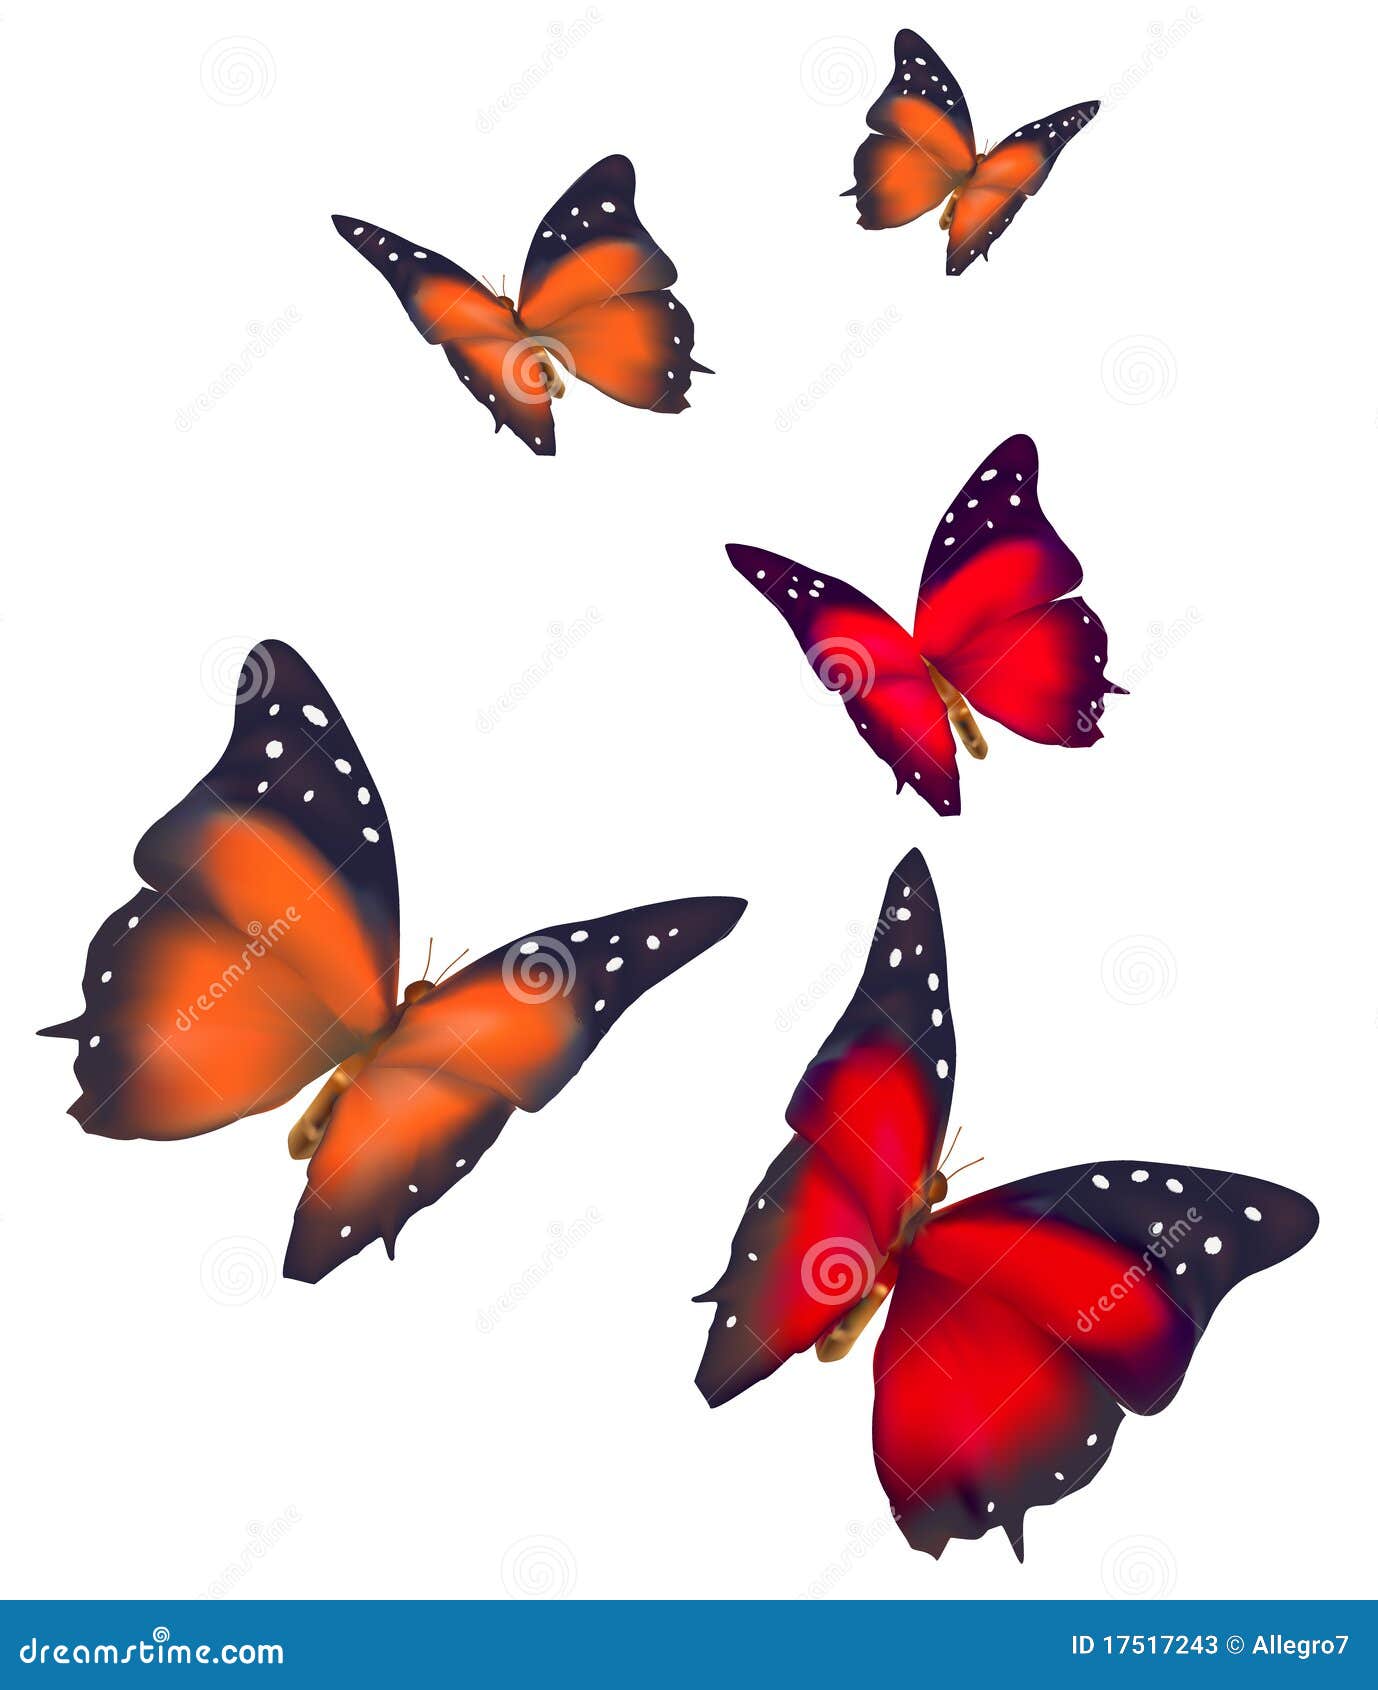 butterfly clipart no background - photo #25